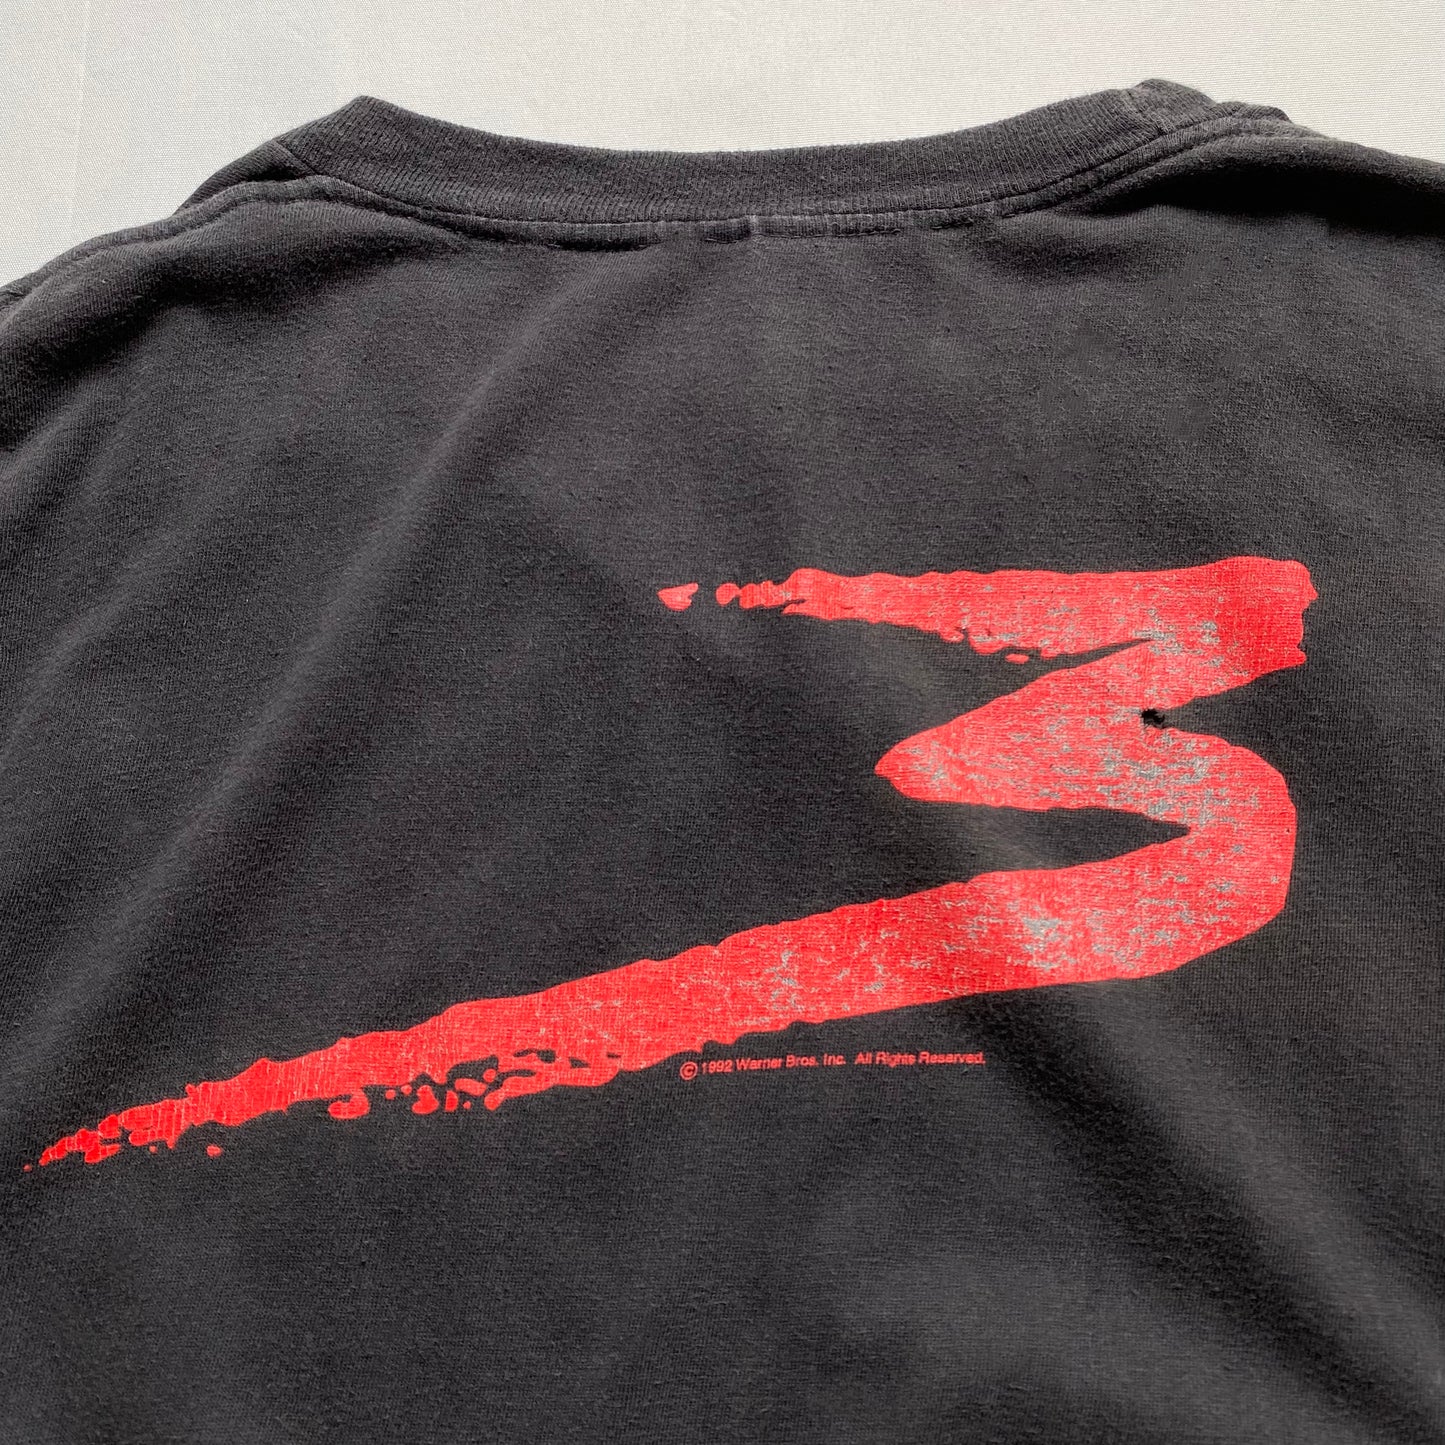 90's "LETHAL WEAPON 3" MOVIE PROMO T-SHIRT